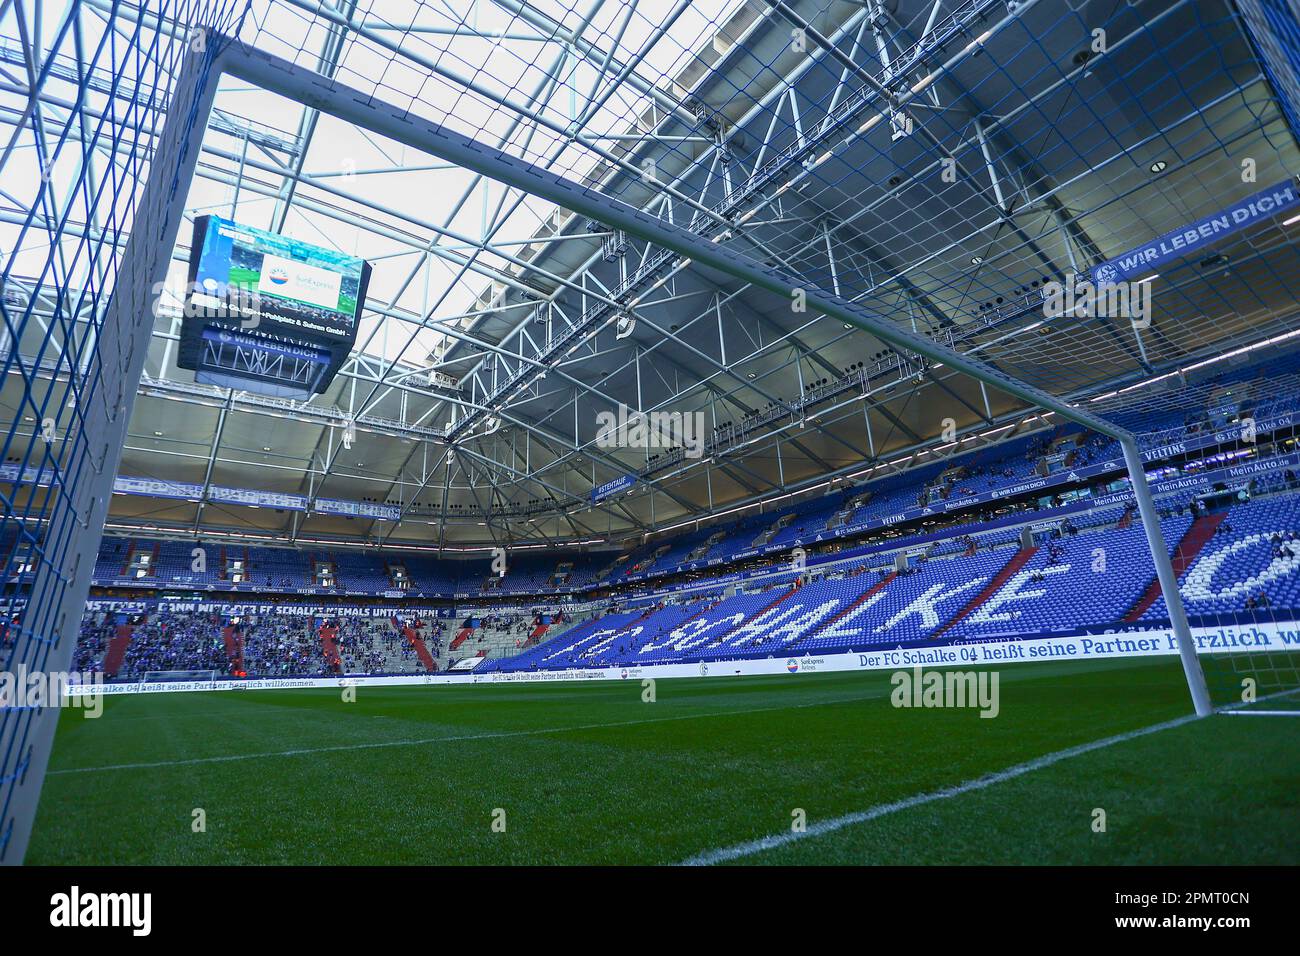 Veltins Arena, Gelsenkirchen GER, FC Schalke 04 vs. Hertha BSC, Fussball, 1. Bundesliga, 28. Spieltag, Spielzeit 2022/2023, 14.04.2023  DFL REGULATIONS PROHIBIT ANY USE OF PHOTOGRAPHS AS IMAGE SEQUENCES AND/OR QUASI-VIDEO.  Credit: Ant Palmer/Alamy Live News Stock Photo